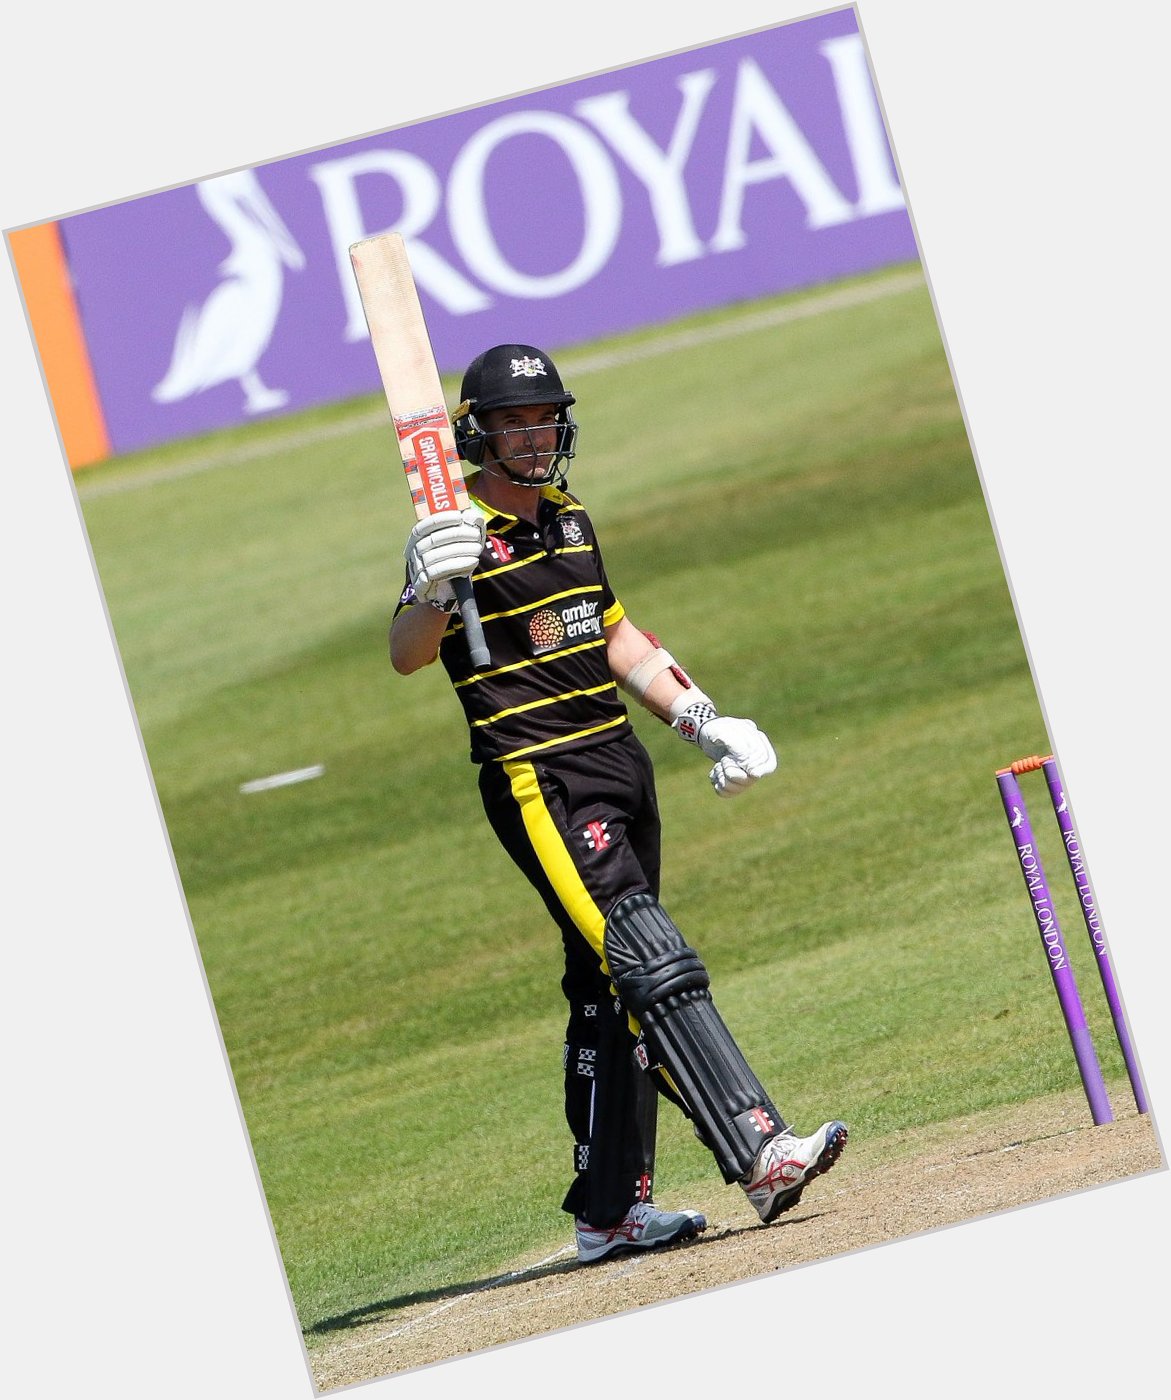 Happy 37th birthday to Michael Klinger from everyone at Gloucestershire County Cricket Club. 